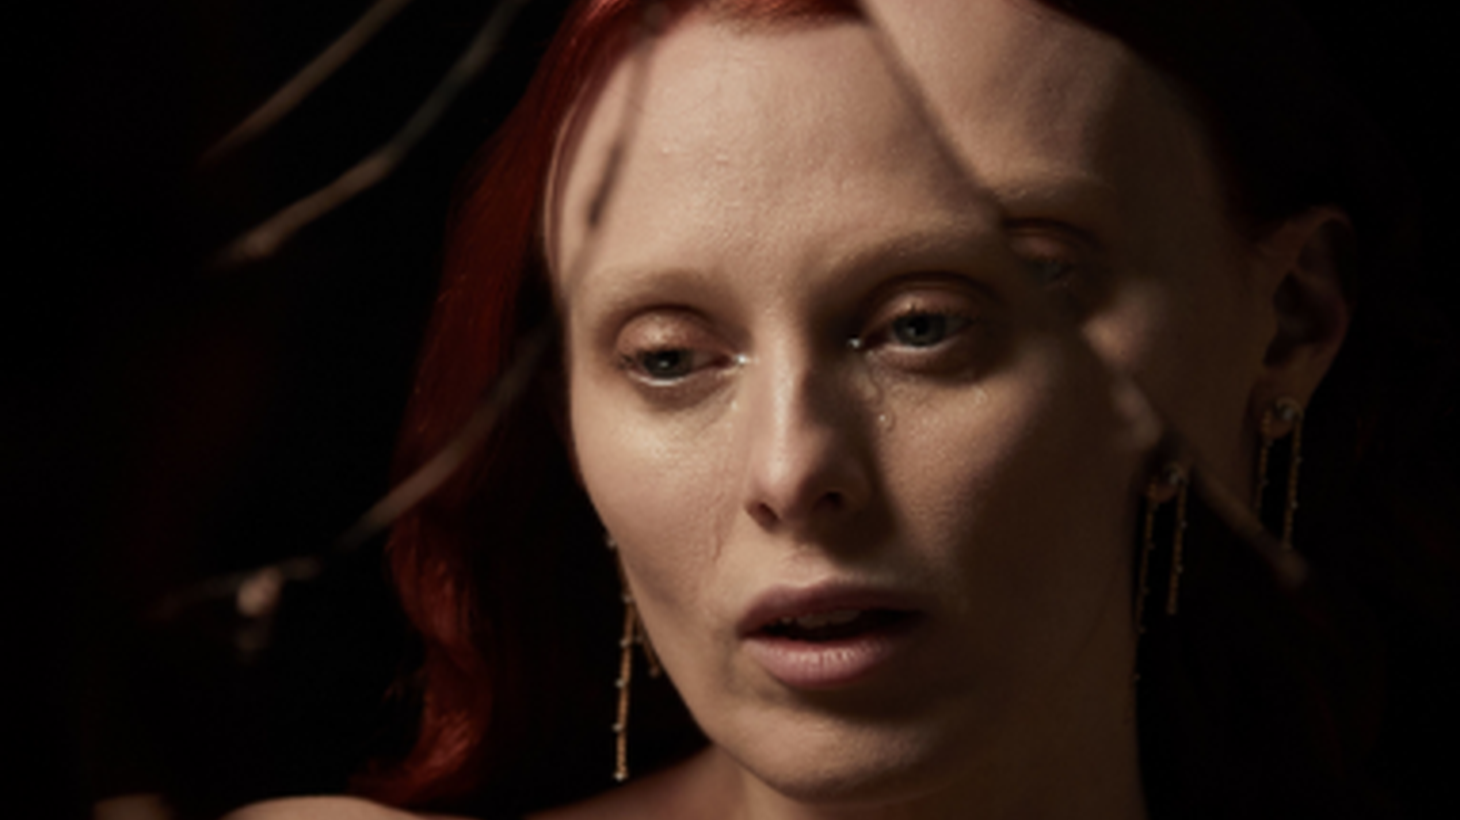 Supermodel, advocate, and musician Karen Elson says of her new song: “‘Broken Shadow’ is about recognizing that we’re all flawed, complicated, and a little bit f**ed up and making peace with that. It’s about loving the broken parts of yourself.